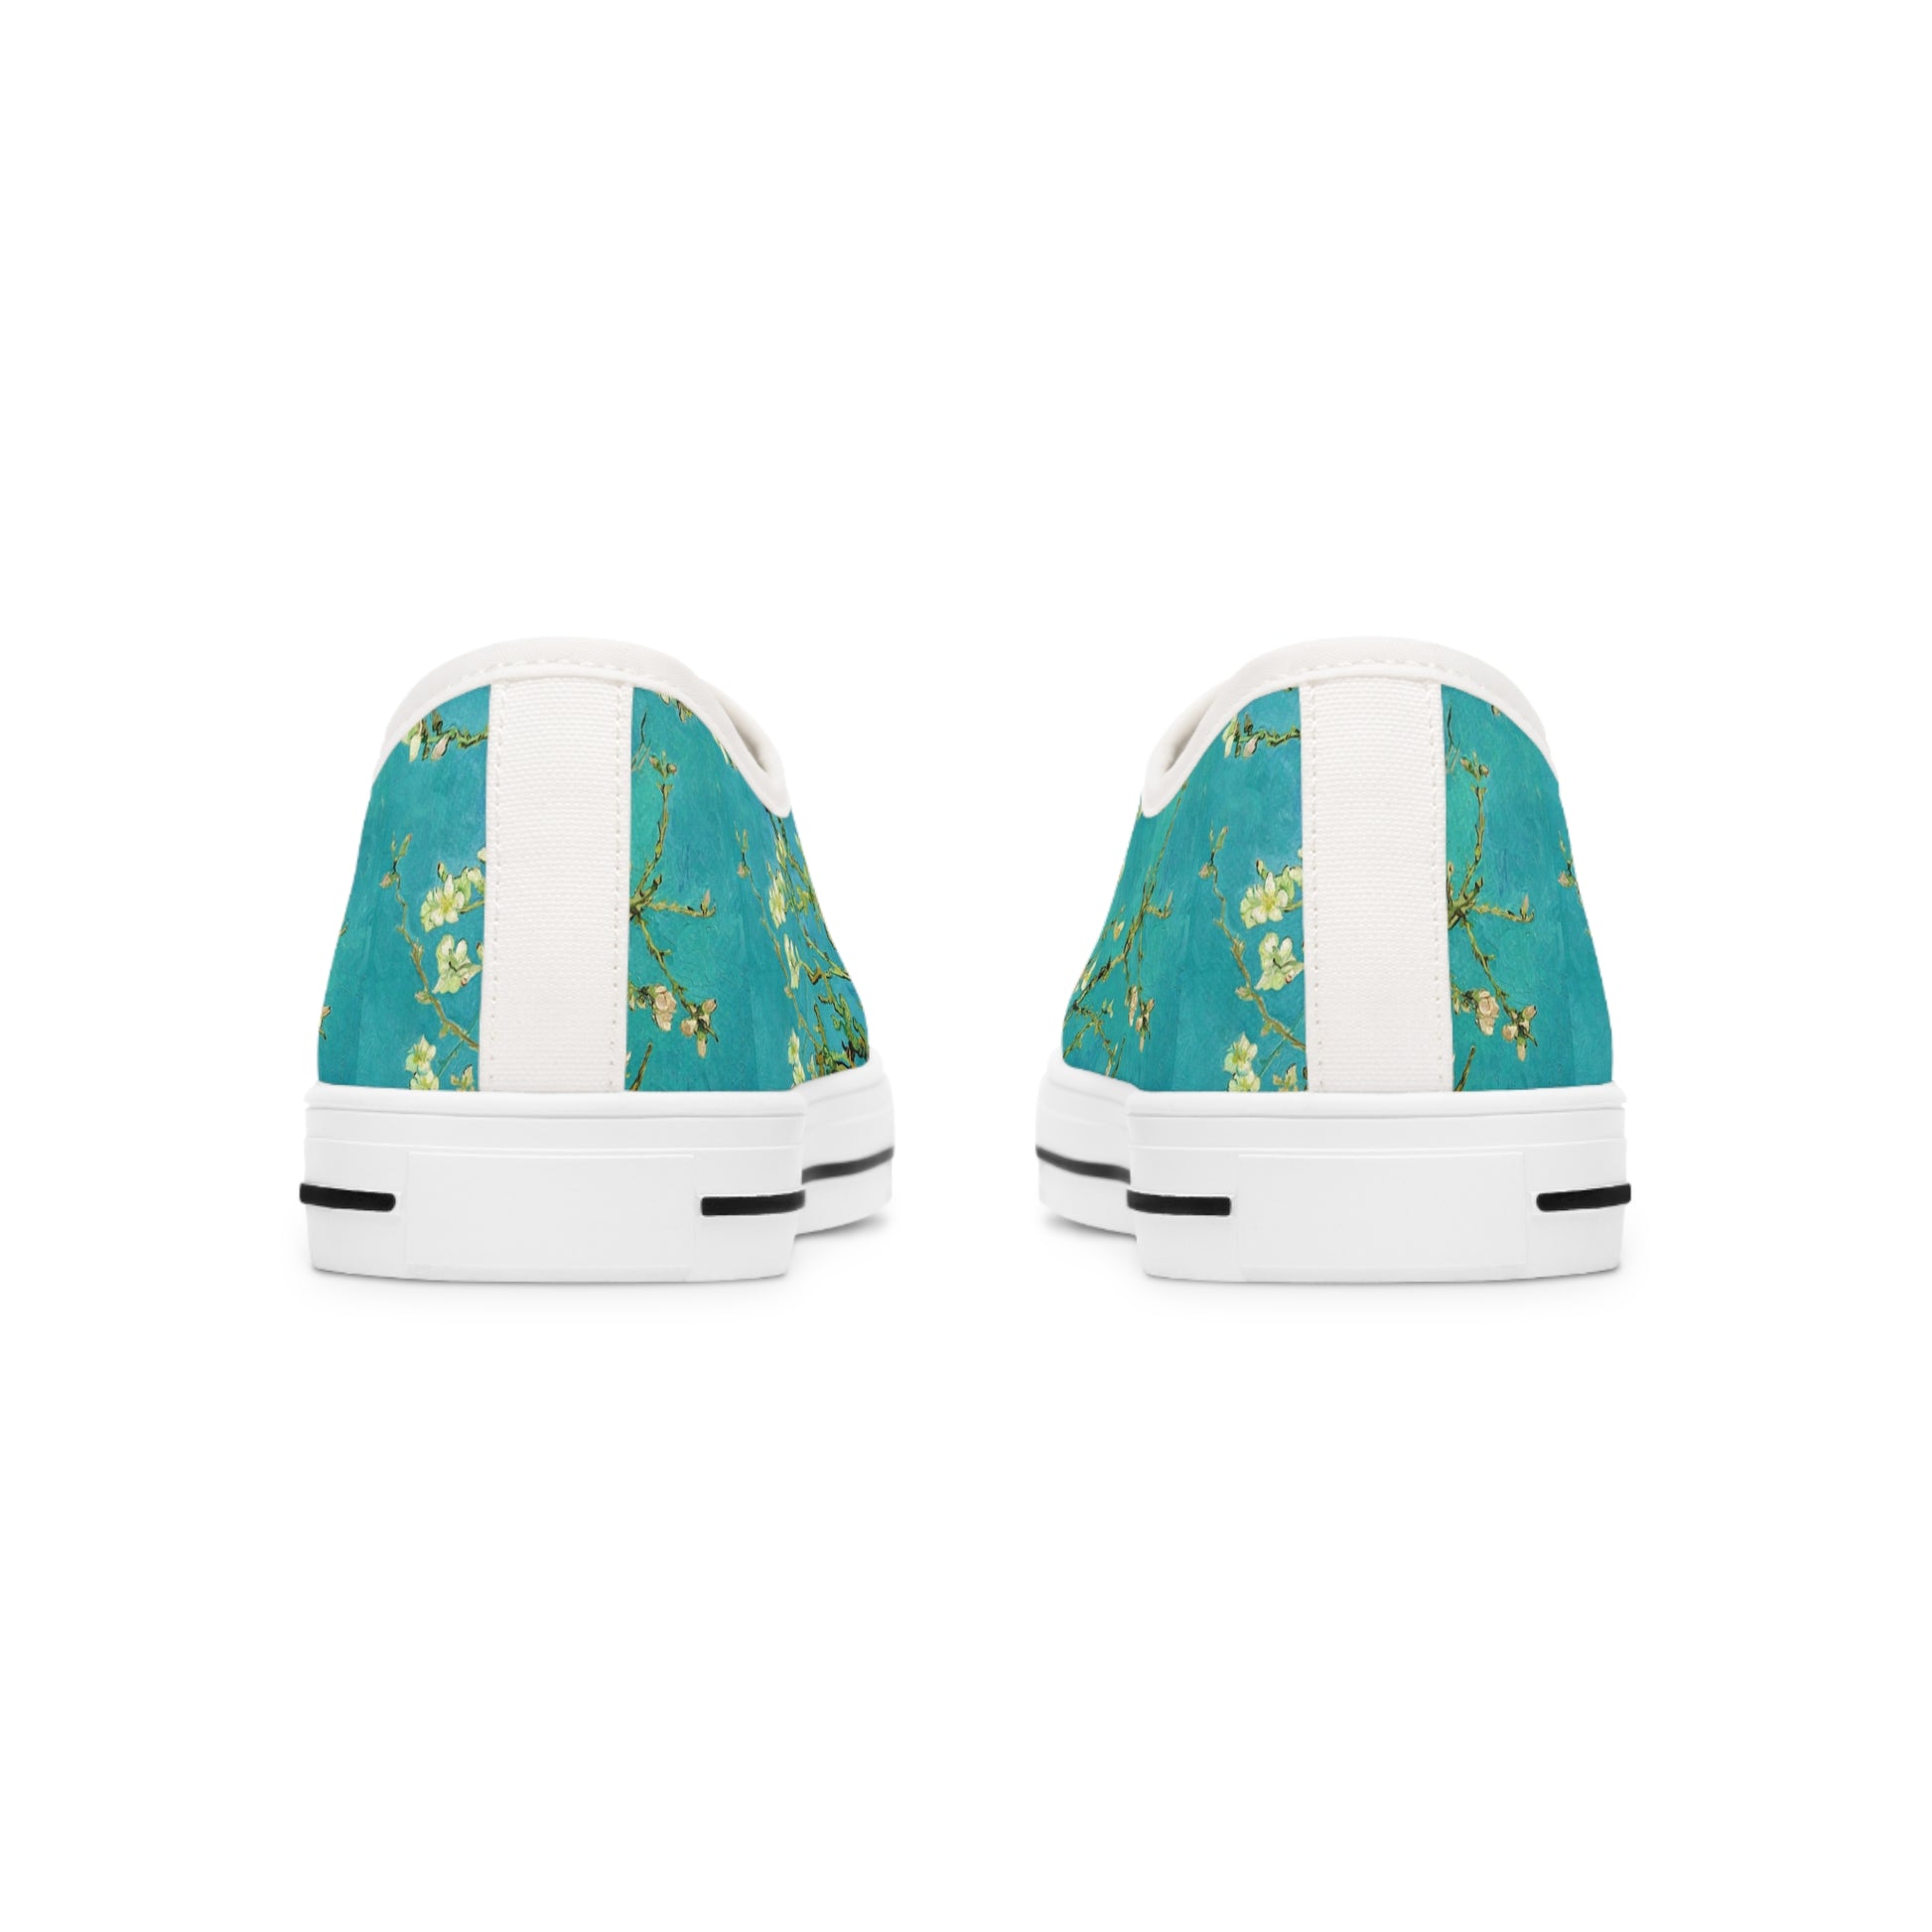 VINCENT VAN GOGH - ALMOND BLOSSOMS - LOW TOP ART SNEAKERS FOR HER